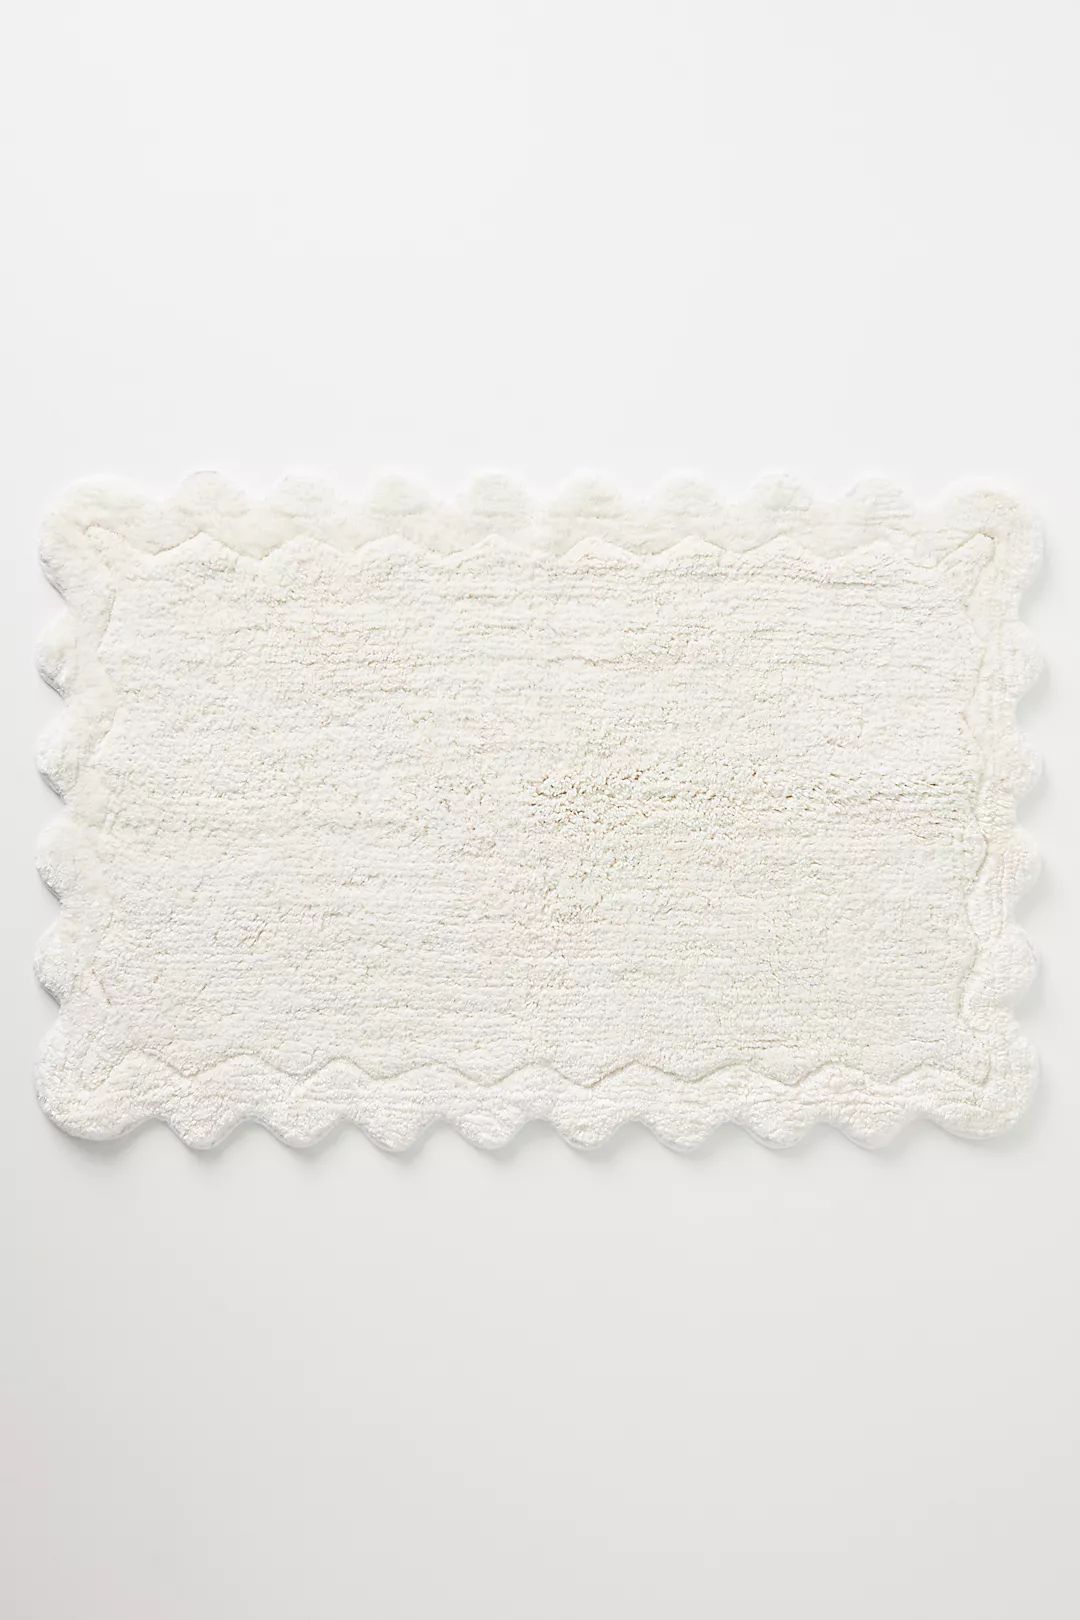 Maeve by Anthropologie Scalloped Bath Mat | Anthropologie (US)